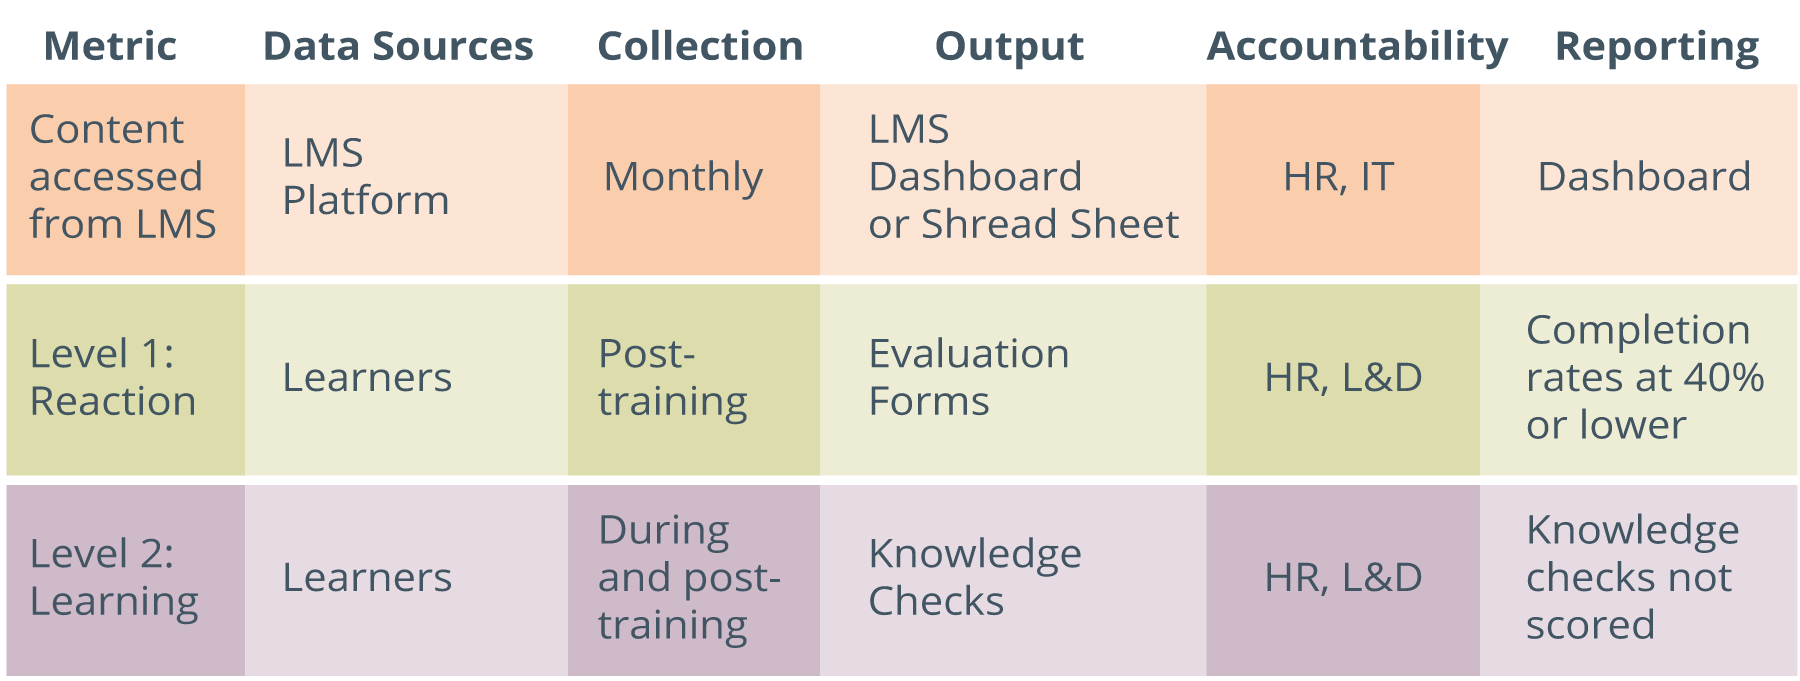 measurement plan chart with column heads: Metric, Data Sources, Collection, Output, Accountability, and Reporting, under metric, row headers of: Content accessed from LMS, Level 1: Reaction, Level 2: Learning, with relevant row information for each about when data collection should happen, the outputs, and who is accountable